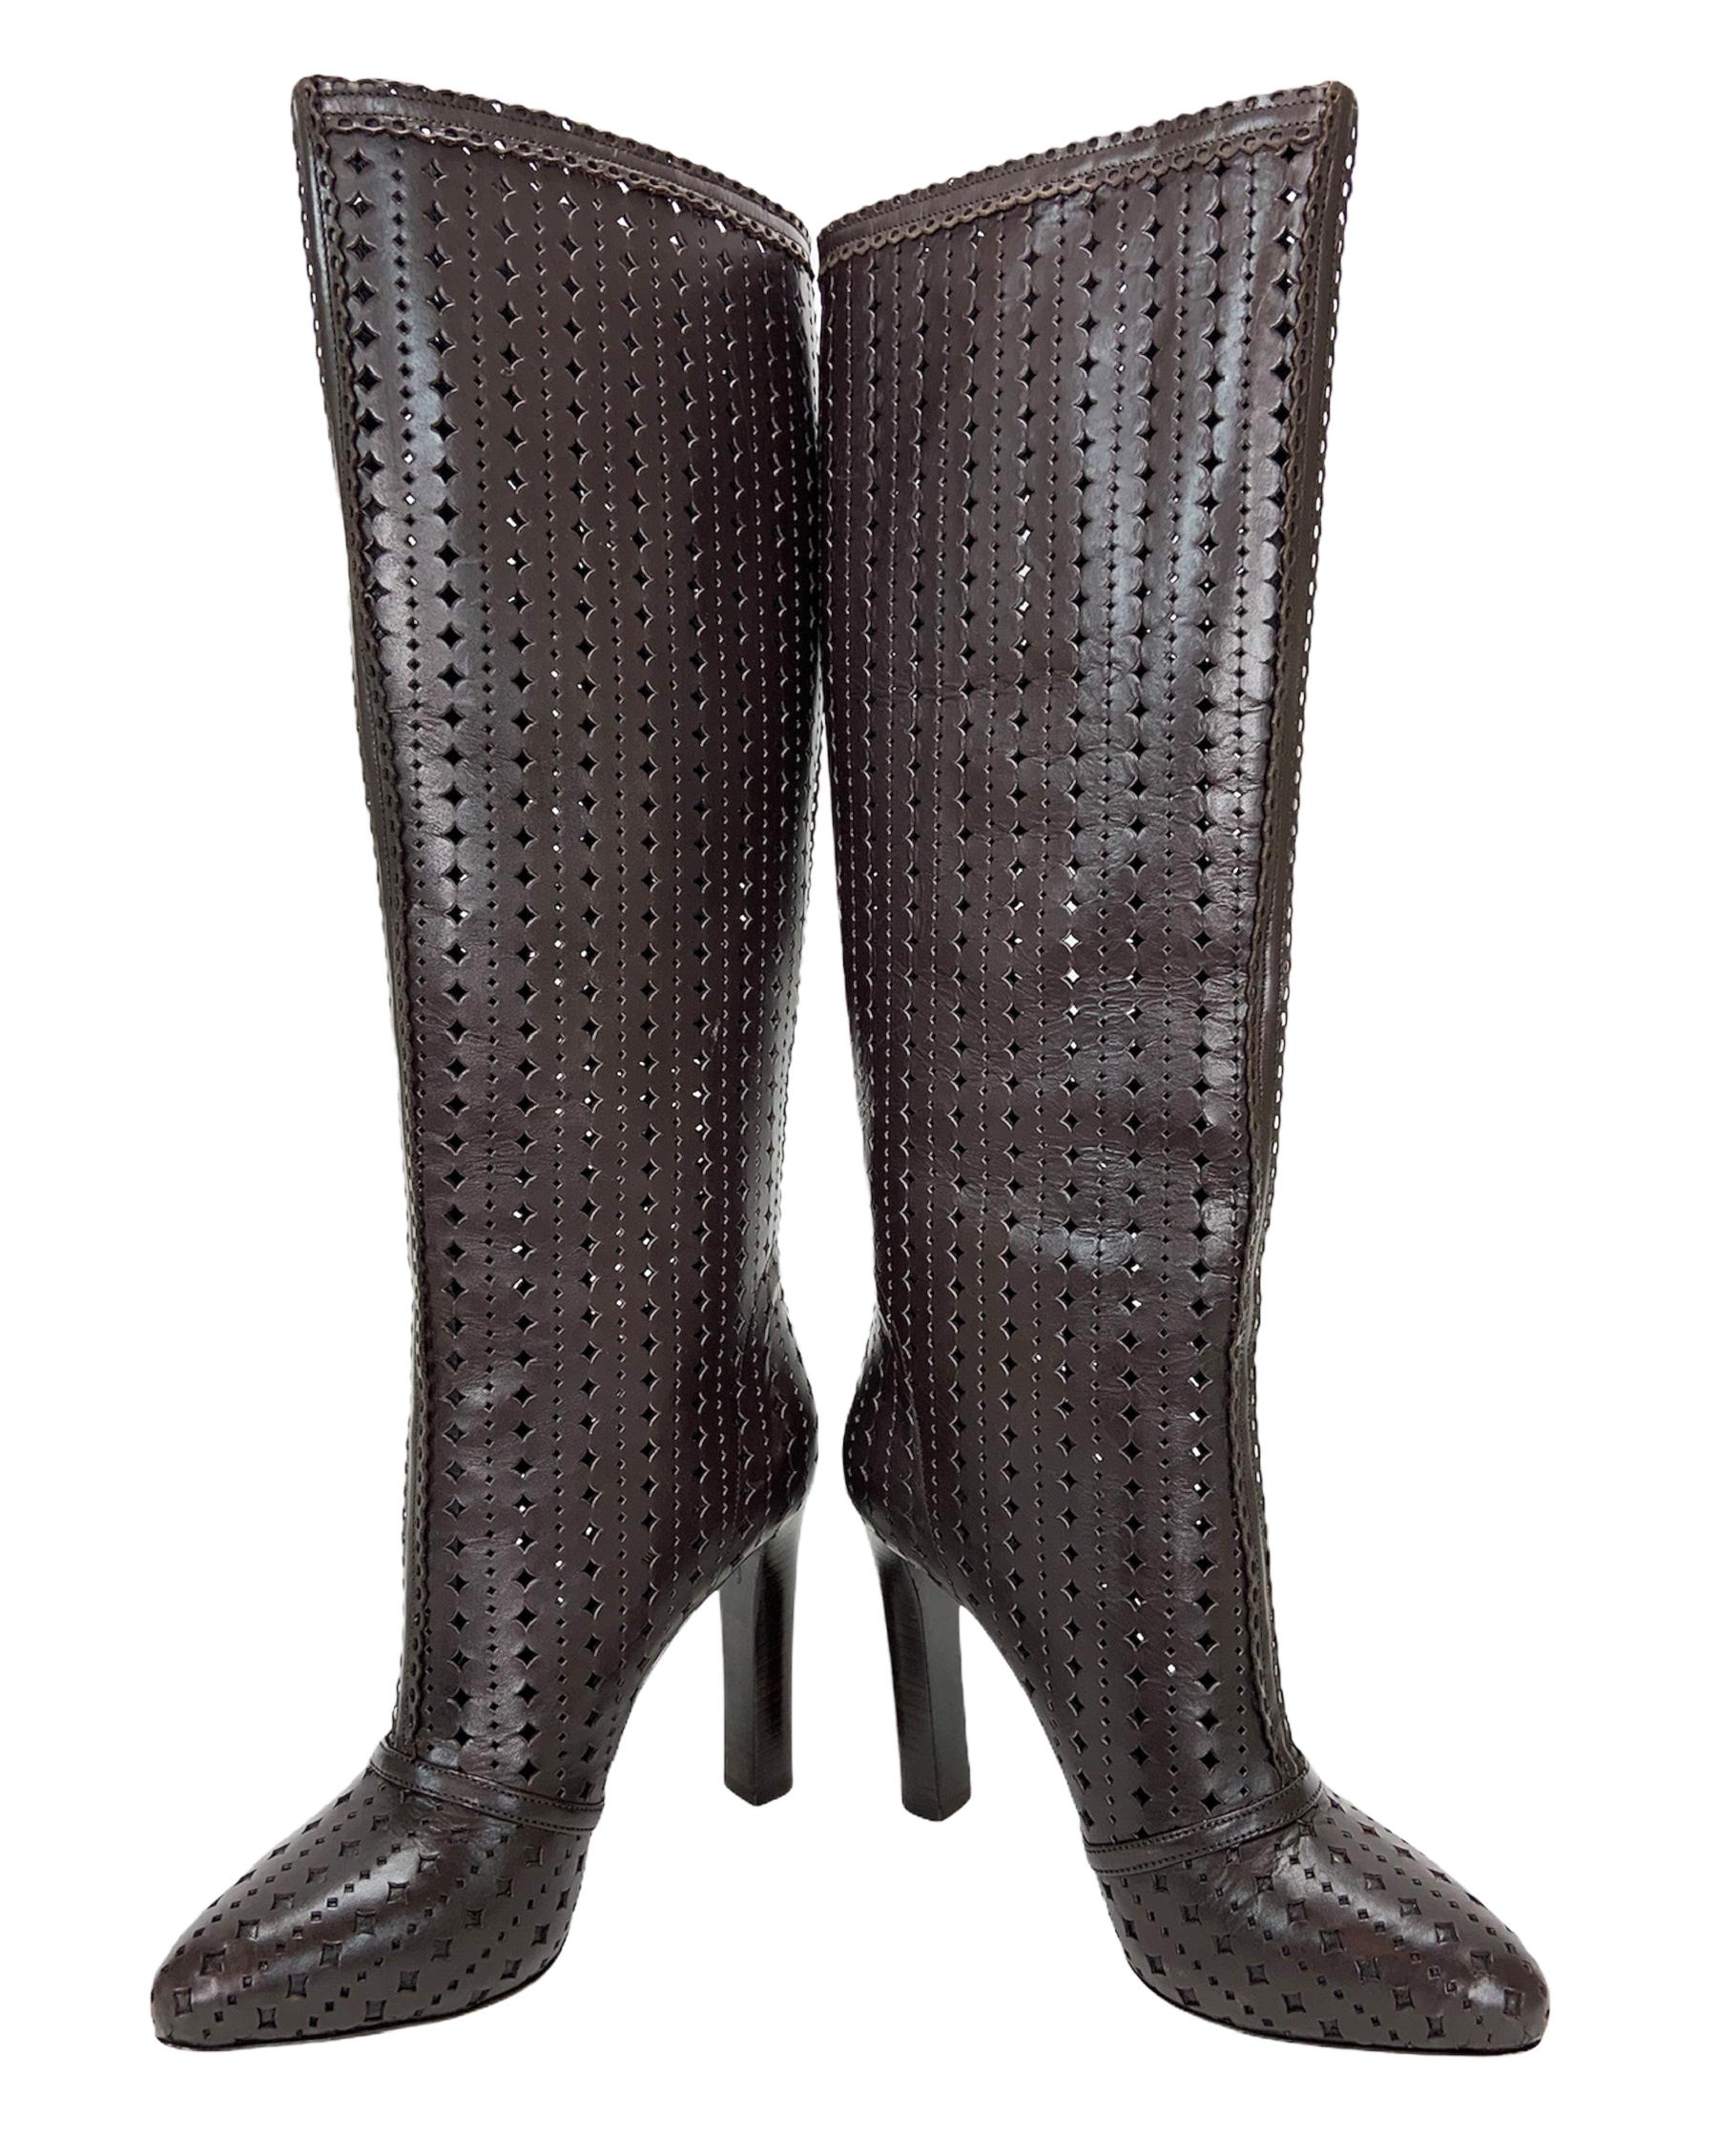 Black New Roberto Cavalli Laser Cut Leather Chocolate Brown Knee High Boots It 39 US 9